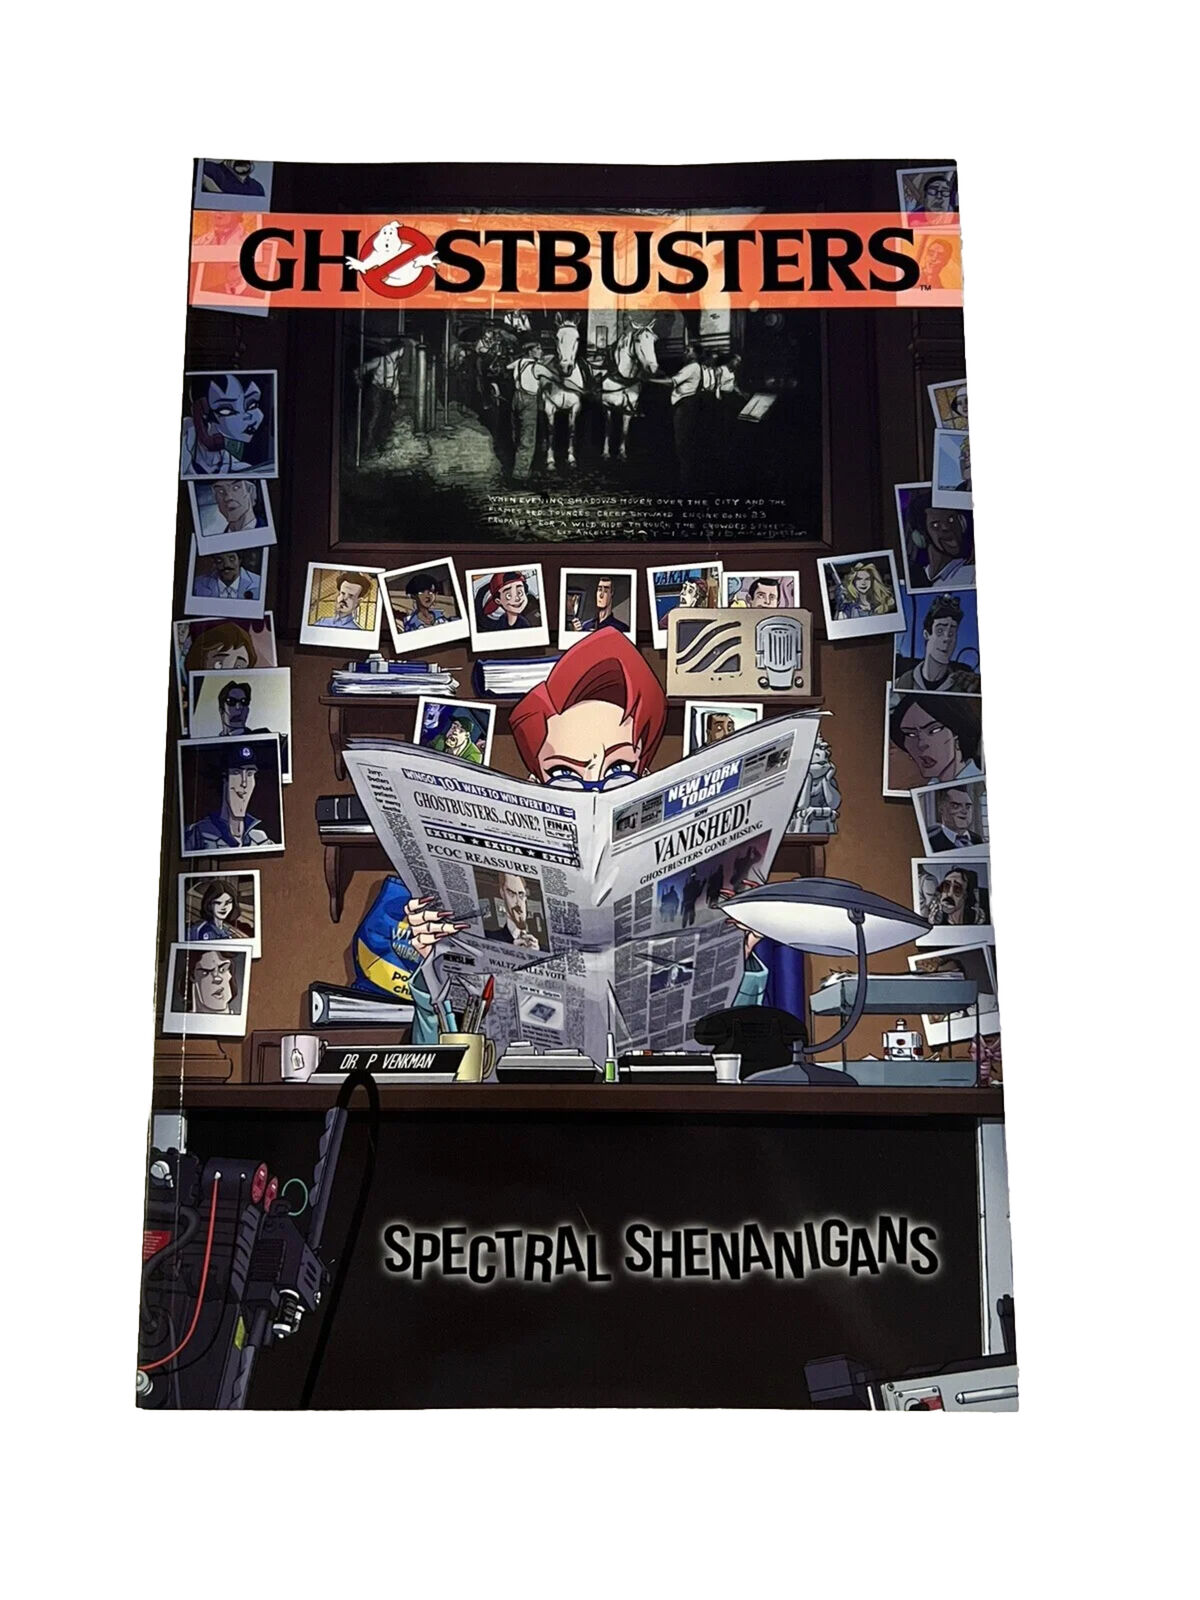 Ghostbusters Spectral Shenanigans Vol 2 Graphic Novel Tpb Omnibus IDW Comics